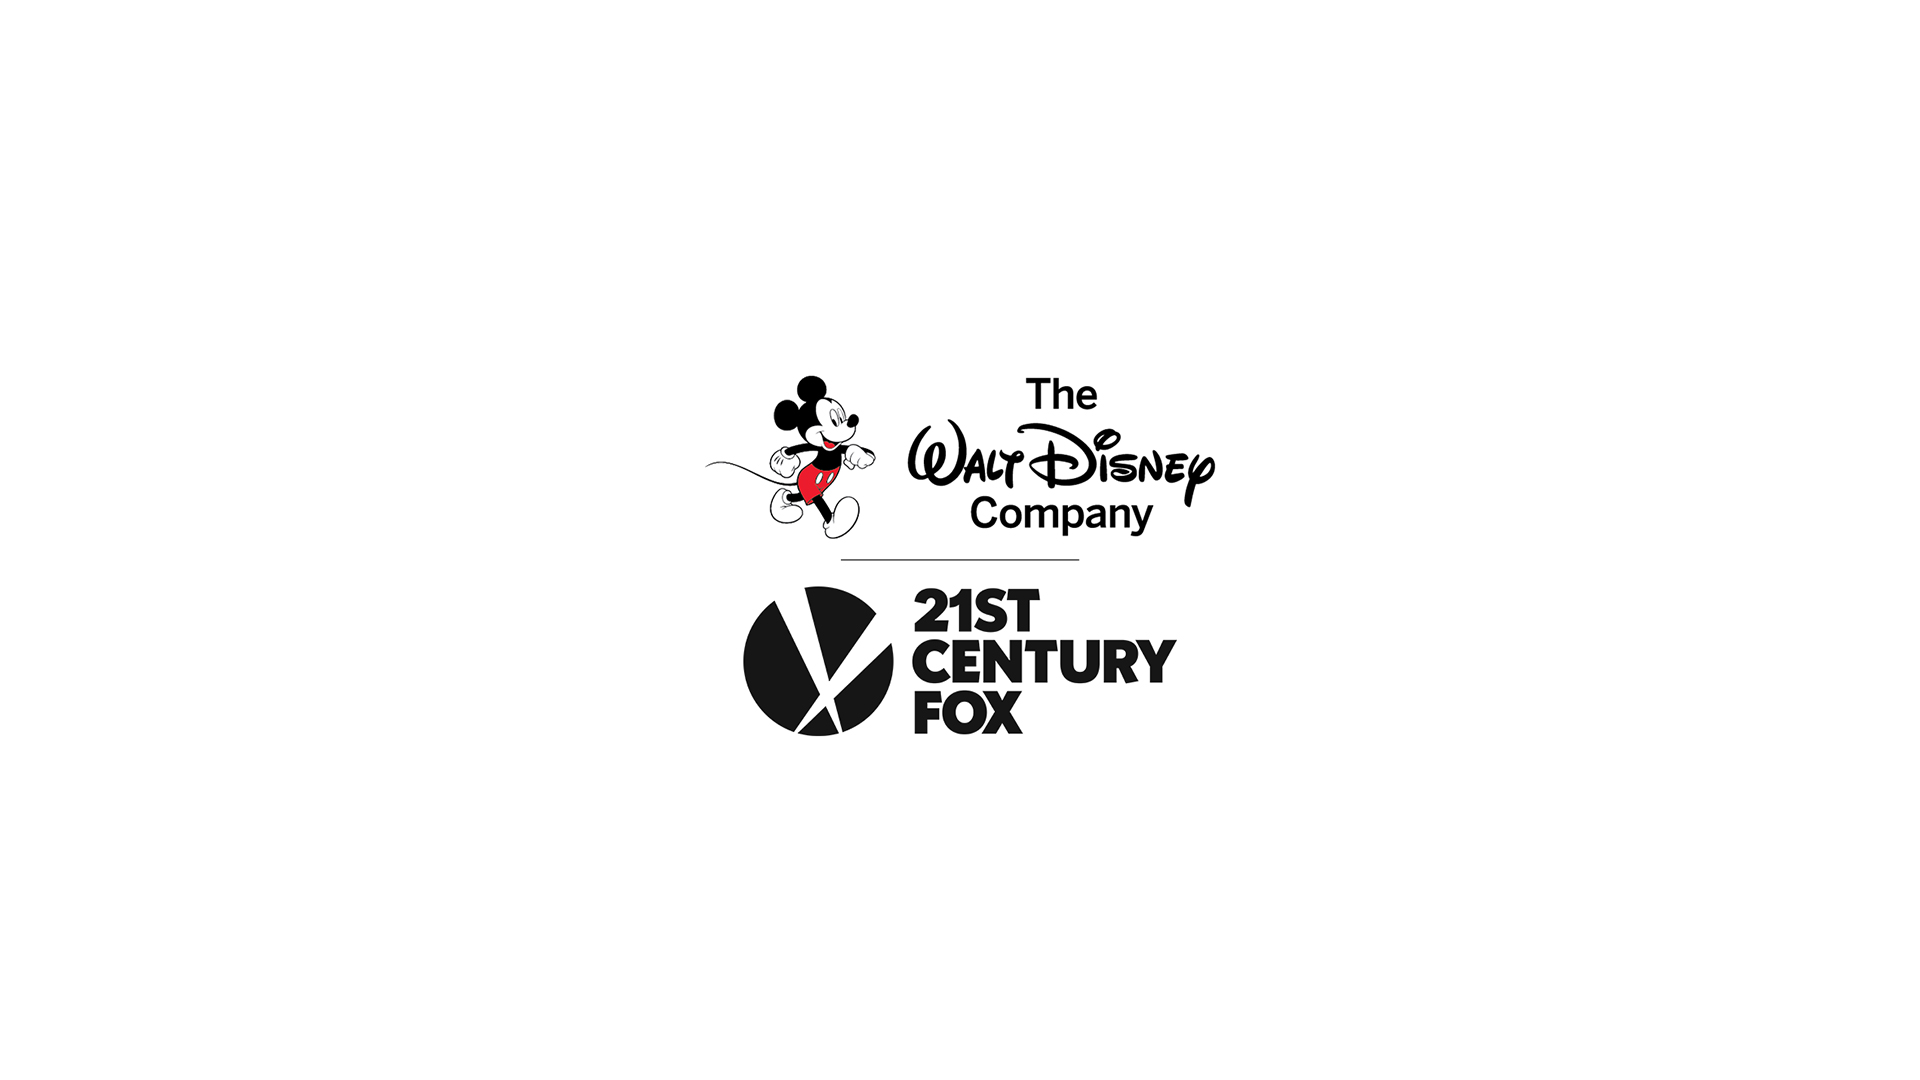 Disney’s Acquisition of 21st Century Fox Will Bring an Unprecedented Collection of Content and Talent to Consumers Around the World - The Walt Disney Company